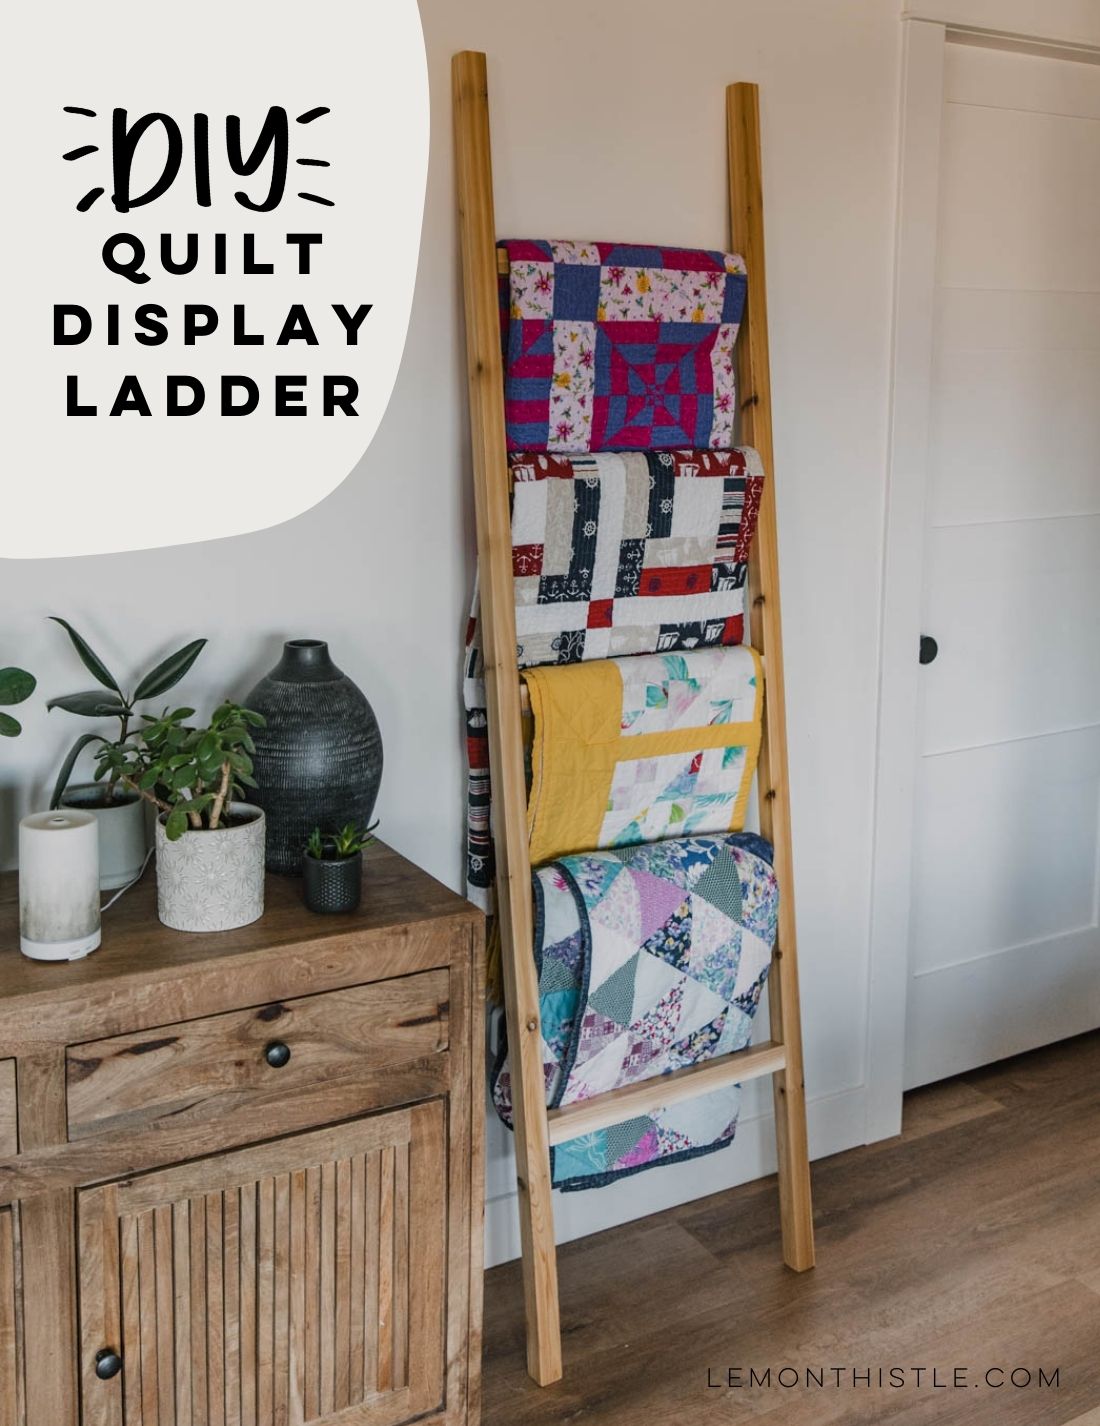 Quilt Display Ladder with text overlay